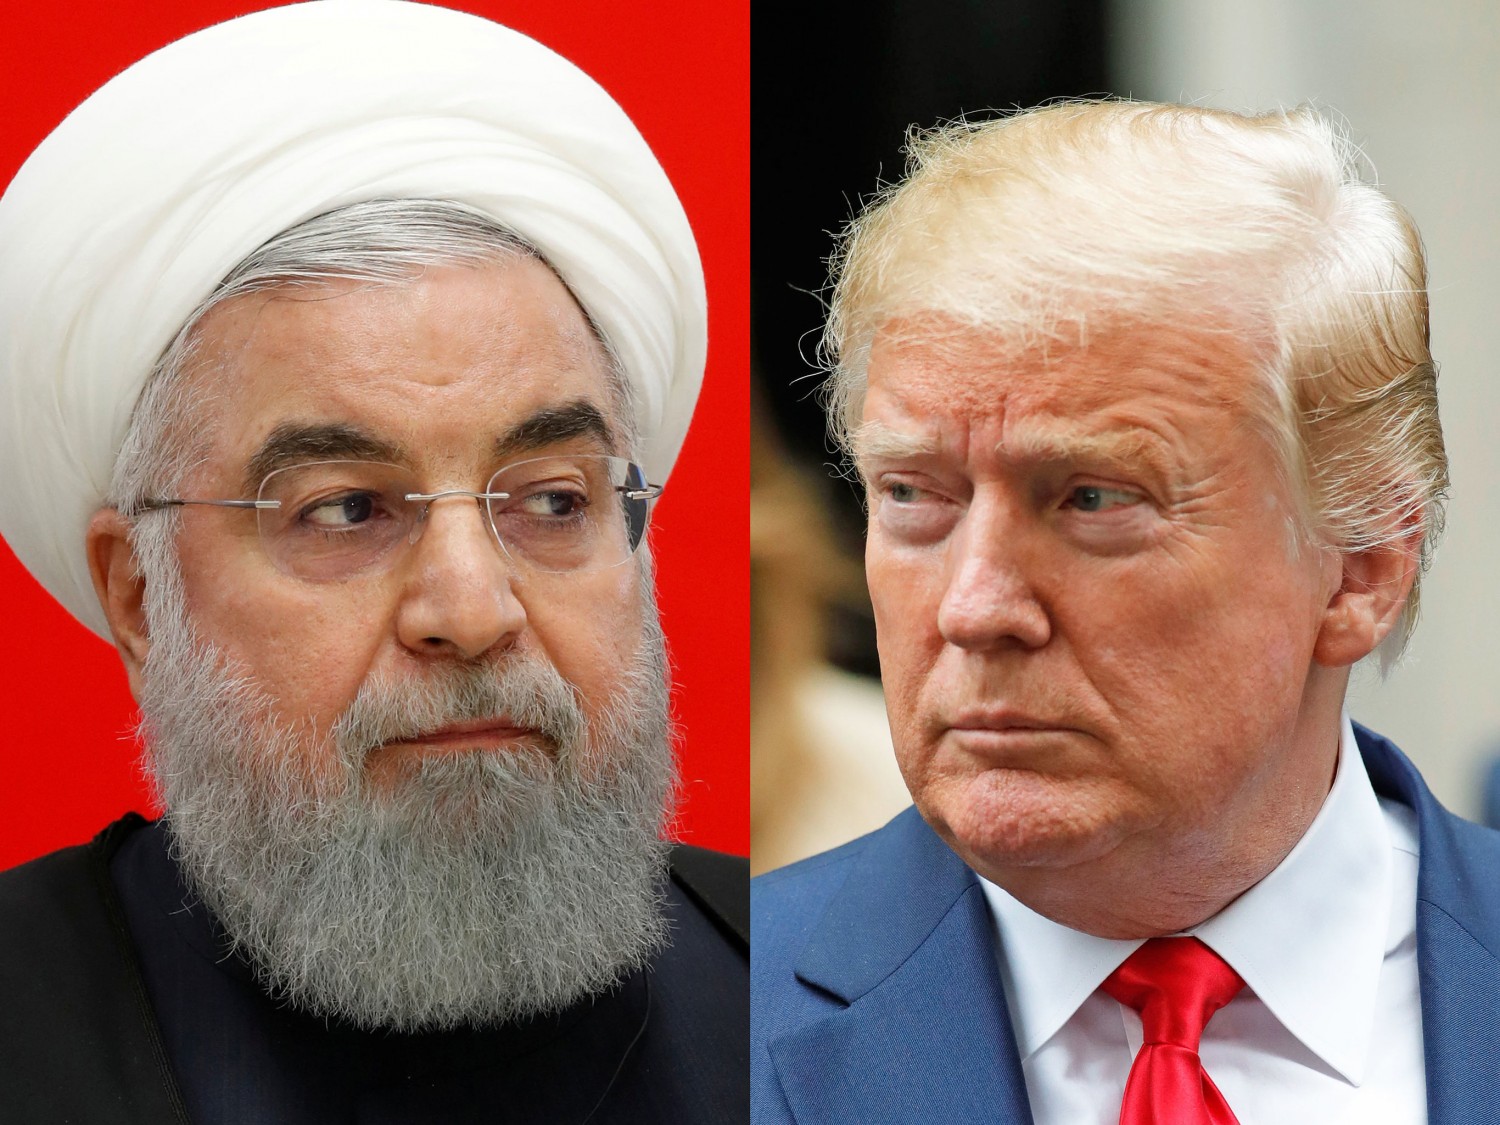 Iranian President Hassan Rouhani and US President Donald Trump. Sergei Chirikov/Pool via REUTERS; GOL/Capital Pictures/MediaPunch/AP